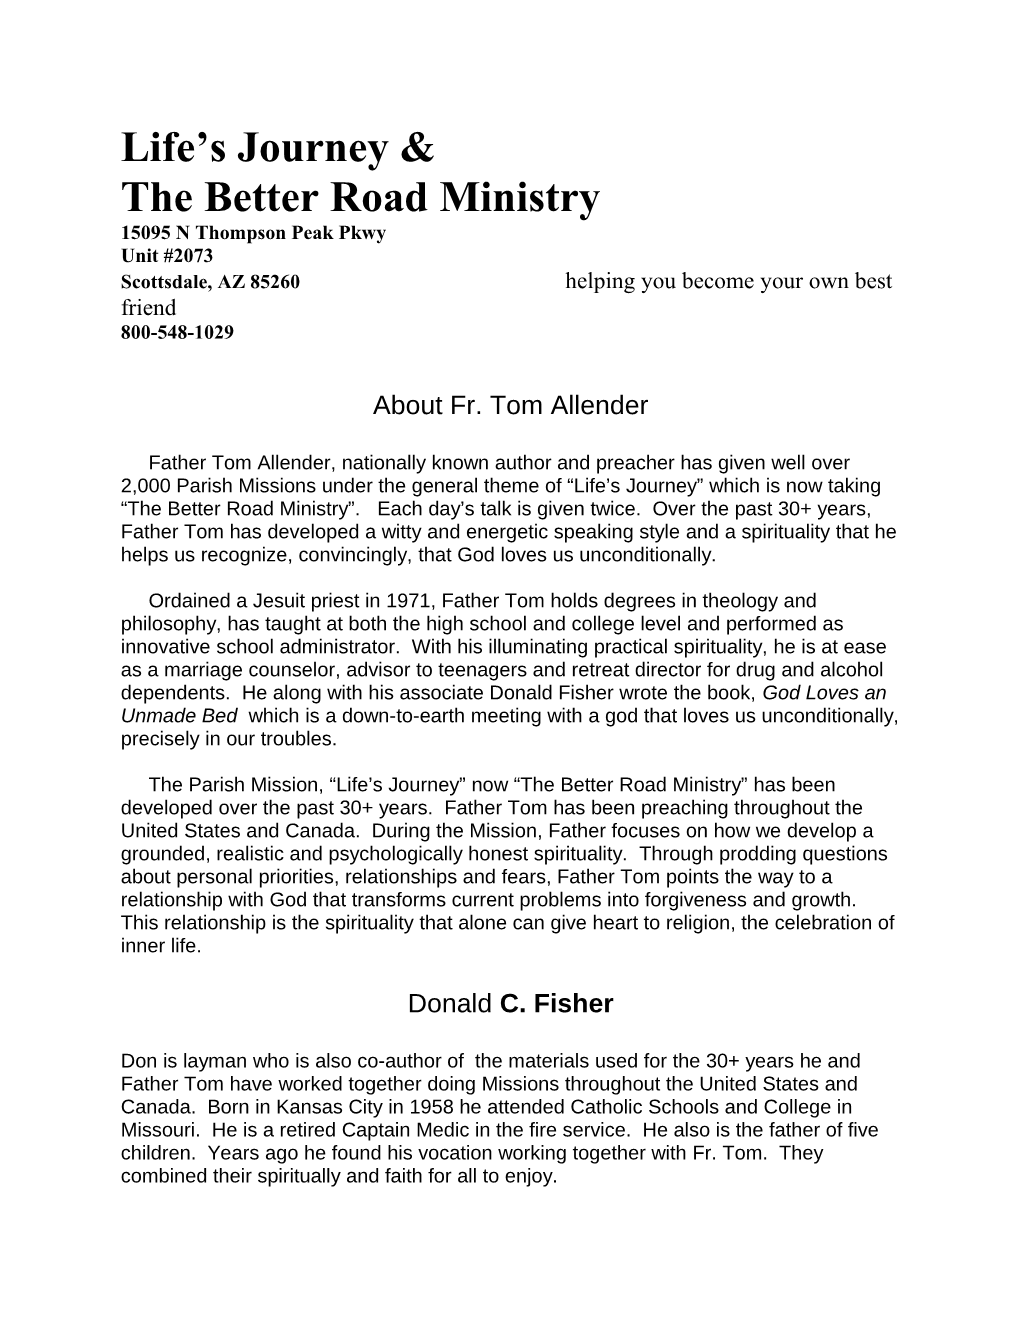 The Better Road Ministry